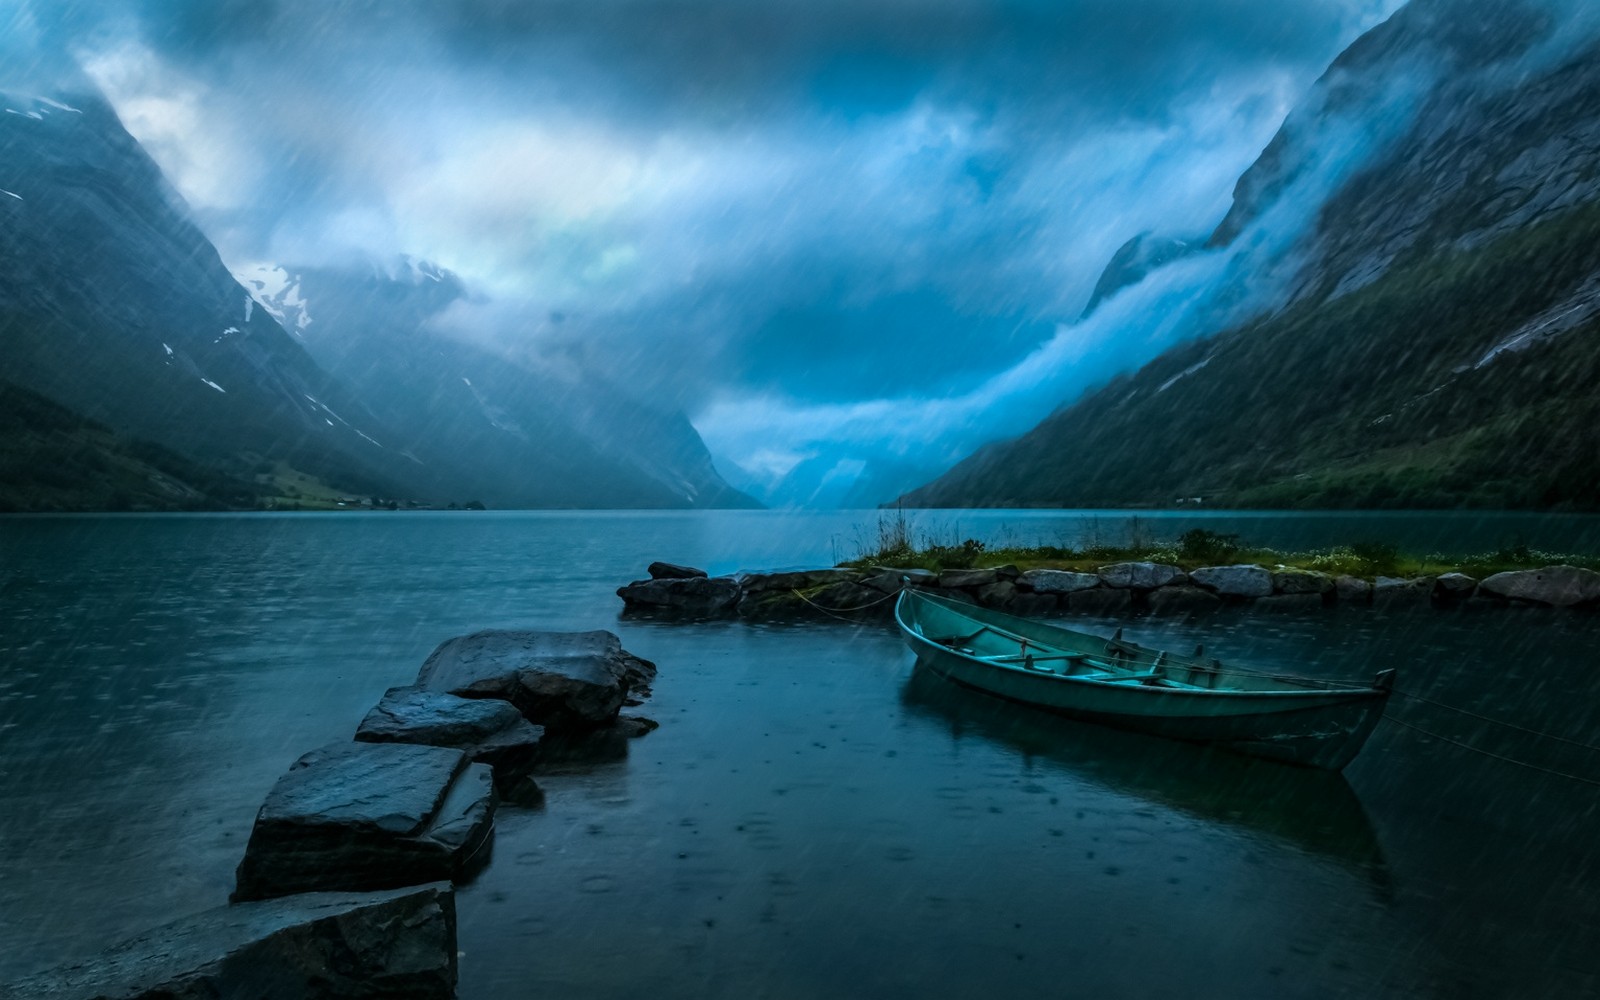 General 1600x1000 nature landscape lake mountains Norway clouds rain blue boat water mist cyan